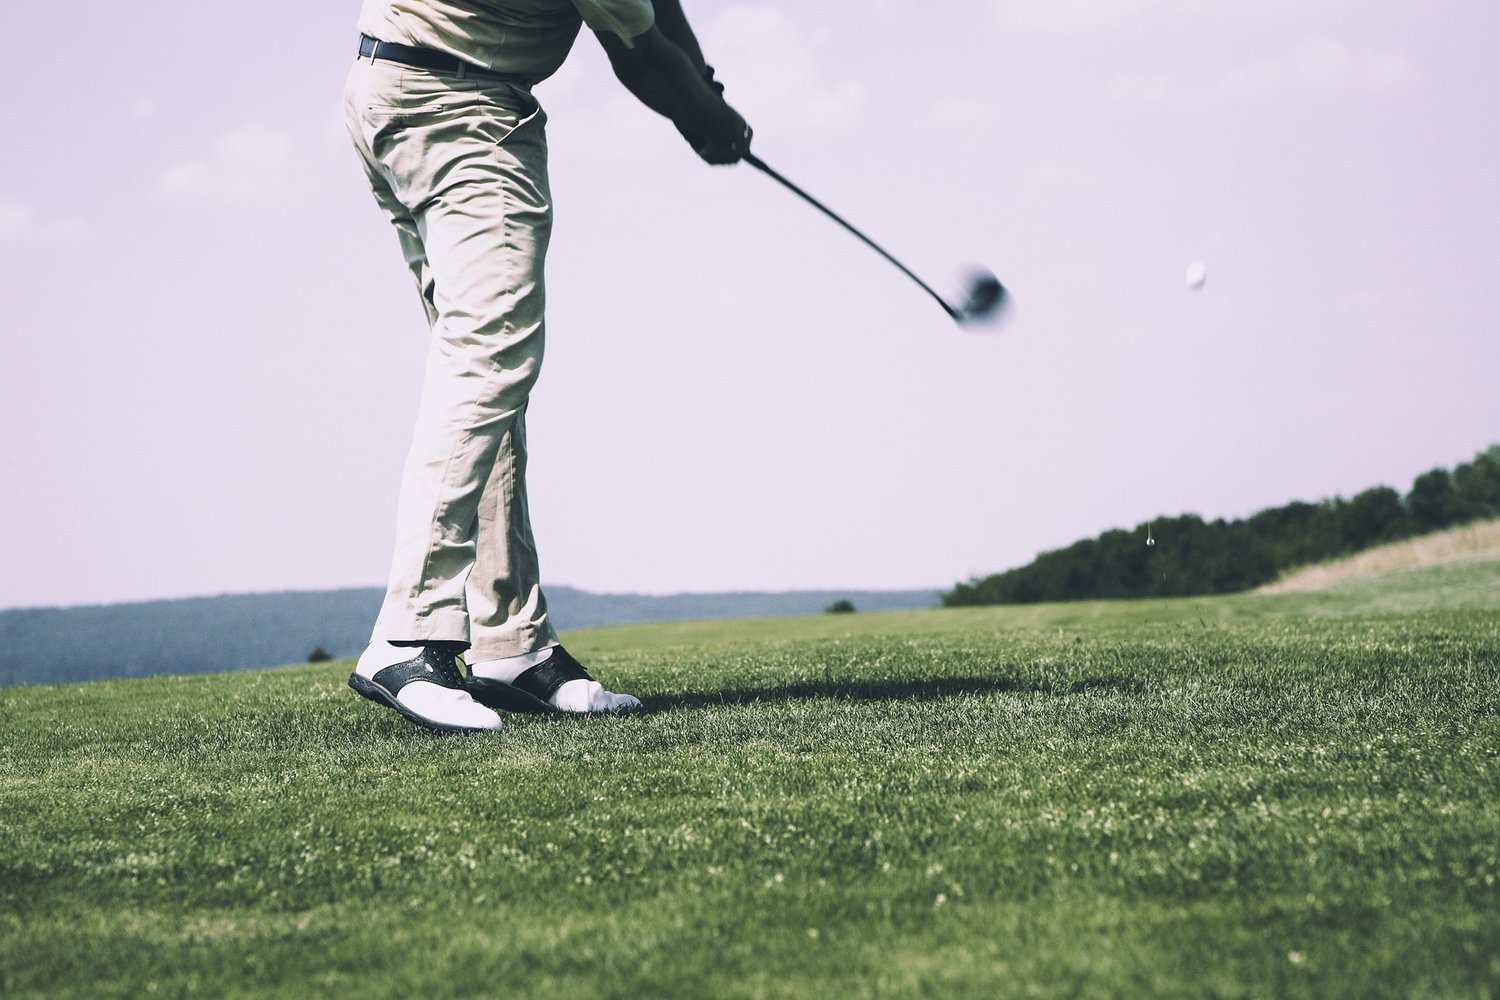 Golfers can start their seasons off for a good cause with the Max Wilson Memorial “Golf for Sight” Tournament at the Peninsula Golf and Racquet Club Friday, March 31. For more information, call Kew Taybi (859-380-0781) or Bruce White (251-967-3323).